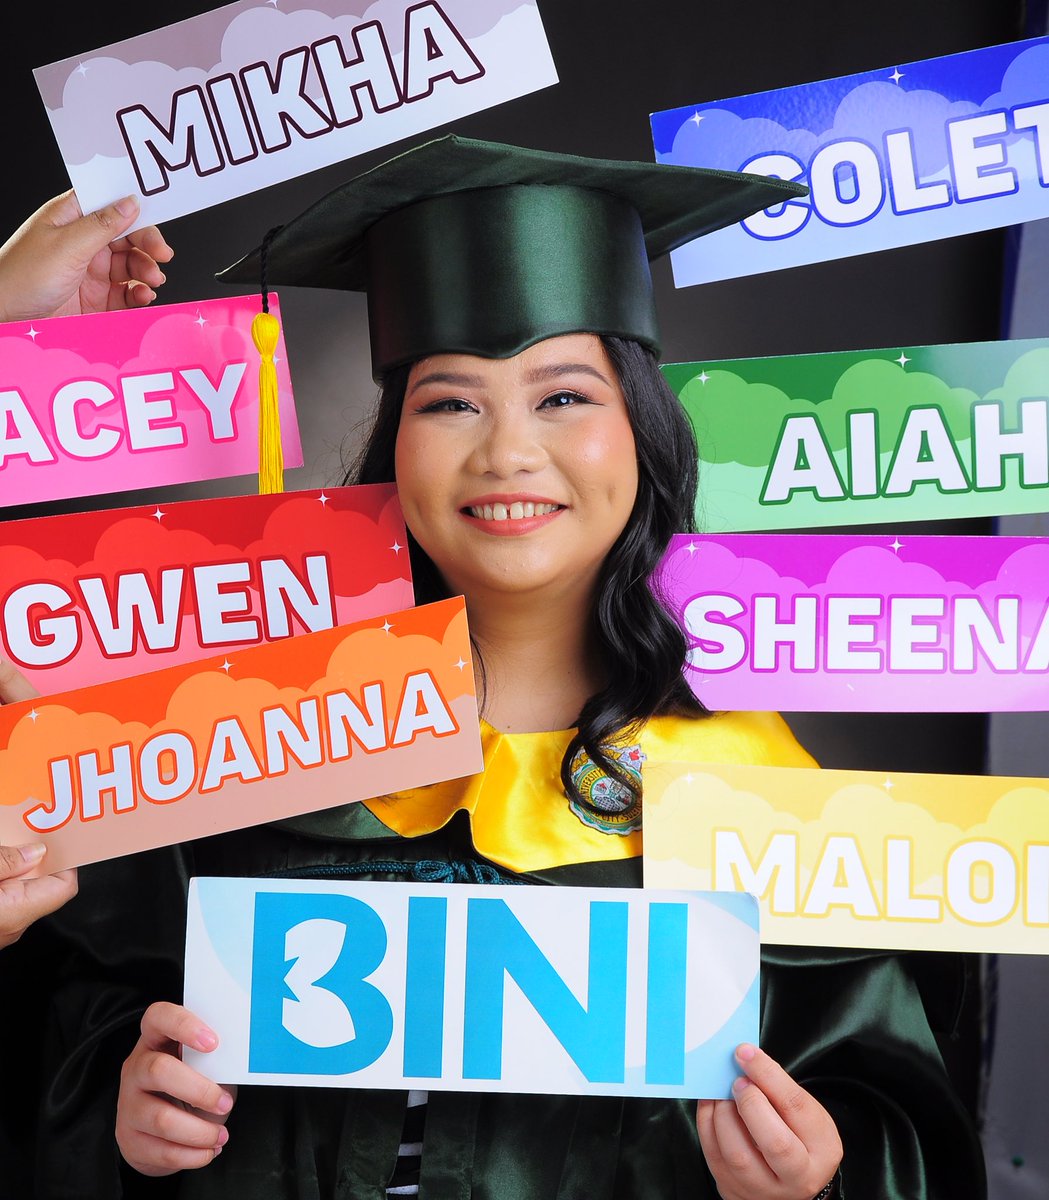 BINI, may na pa graduate na naman kayo!😁

Scar, CTT
Bachelor of Science in Management Accounting 
Class of 2024

🏅𝐌𝐚𝐠𝐧𝐚 𝐂𝐮𝐦 𝐋𝐚𝐮𝐝𝐞
       🎖️22/285 Honors (SBM)
       🎖️57/529 Honors (Overall)
🏅Consistent Dean's Lister
🏅Loyalty Awardee
🏅 Certified Tax Technician